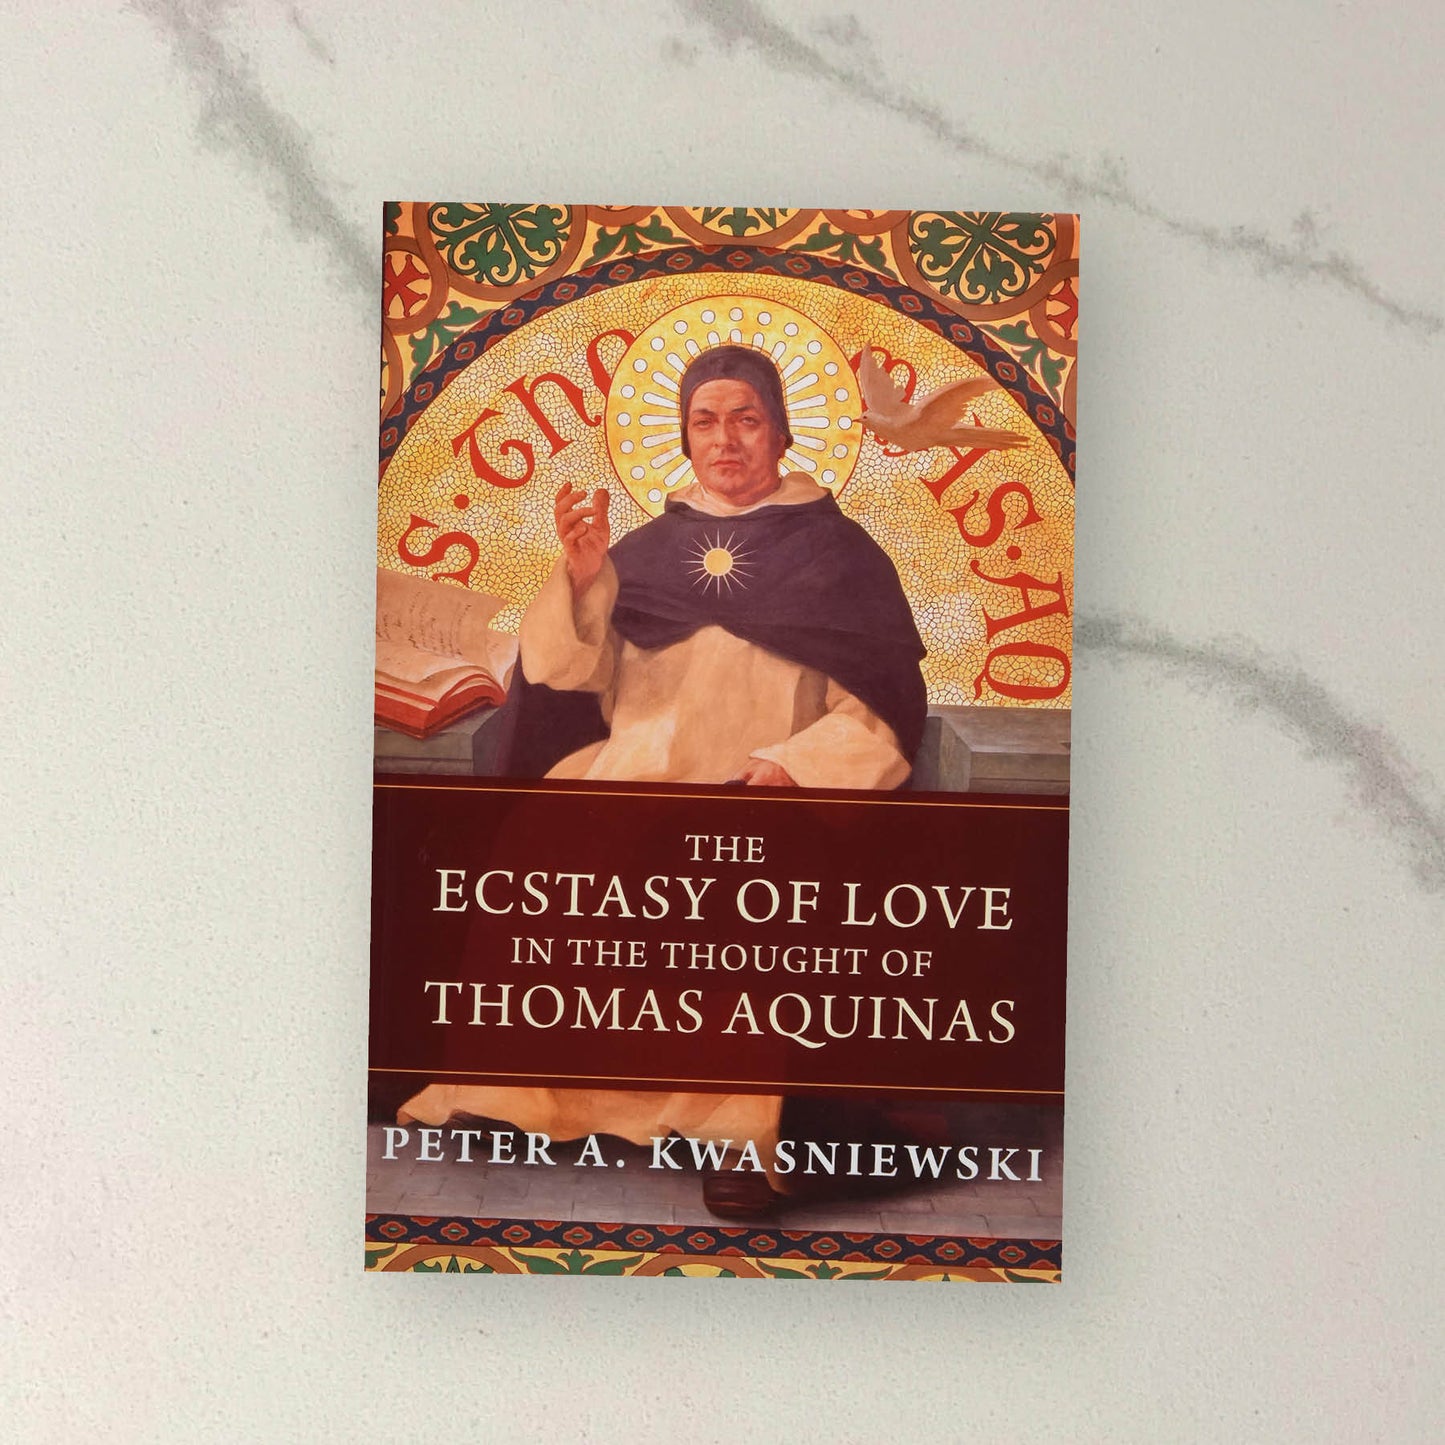 The Ecstasy of Love in the Thought of Thomas Aquinas